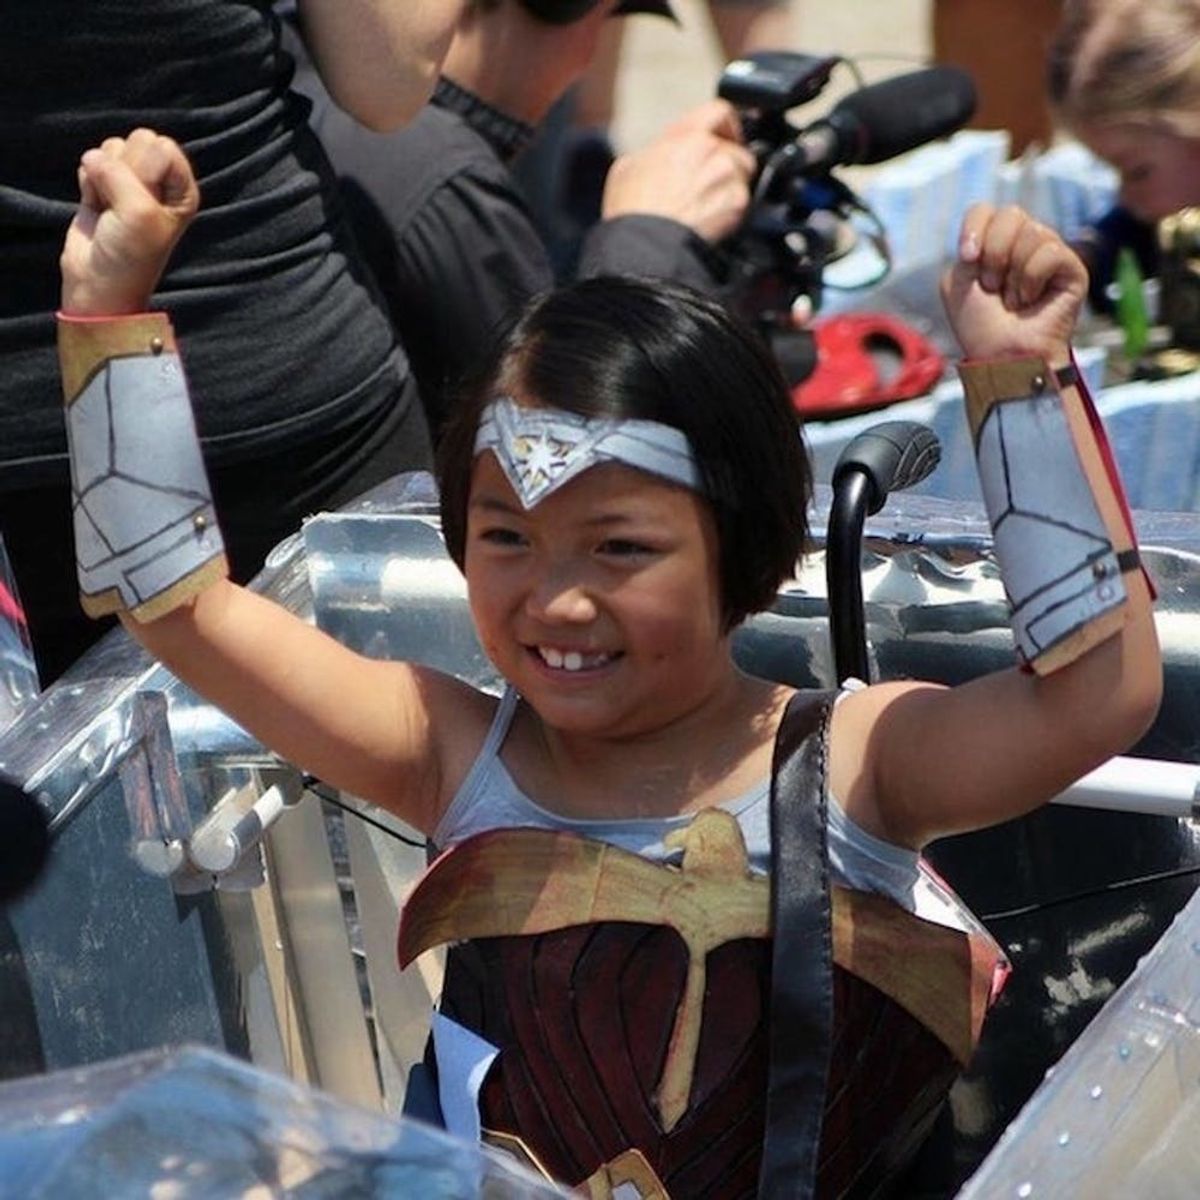 This Husband and Wife Team Make Epic Costumes for Kids in Wheelchairs to Feel “Badass”